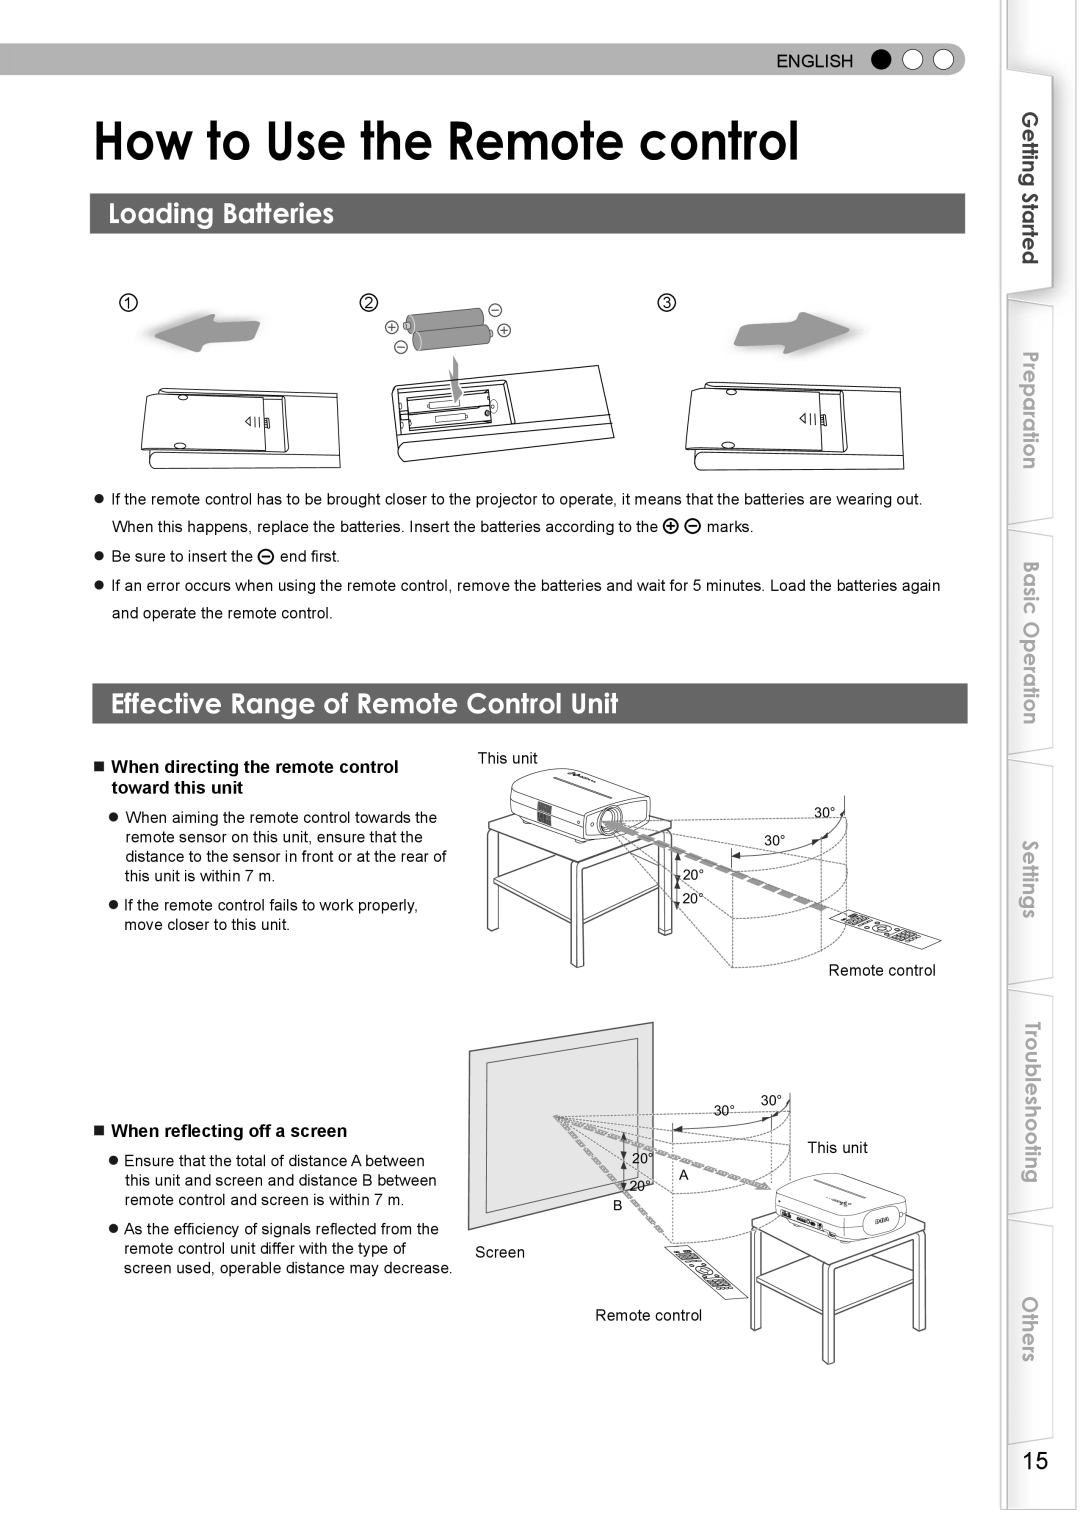 JVC PC007182399-1 How to Use the Remote control, Loading Batteries, Effective Range of Remote Control Unit, Settings 